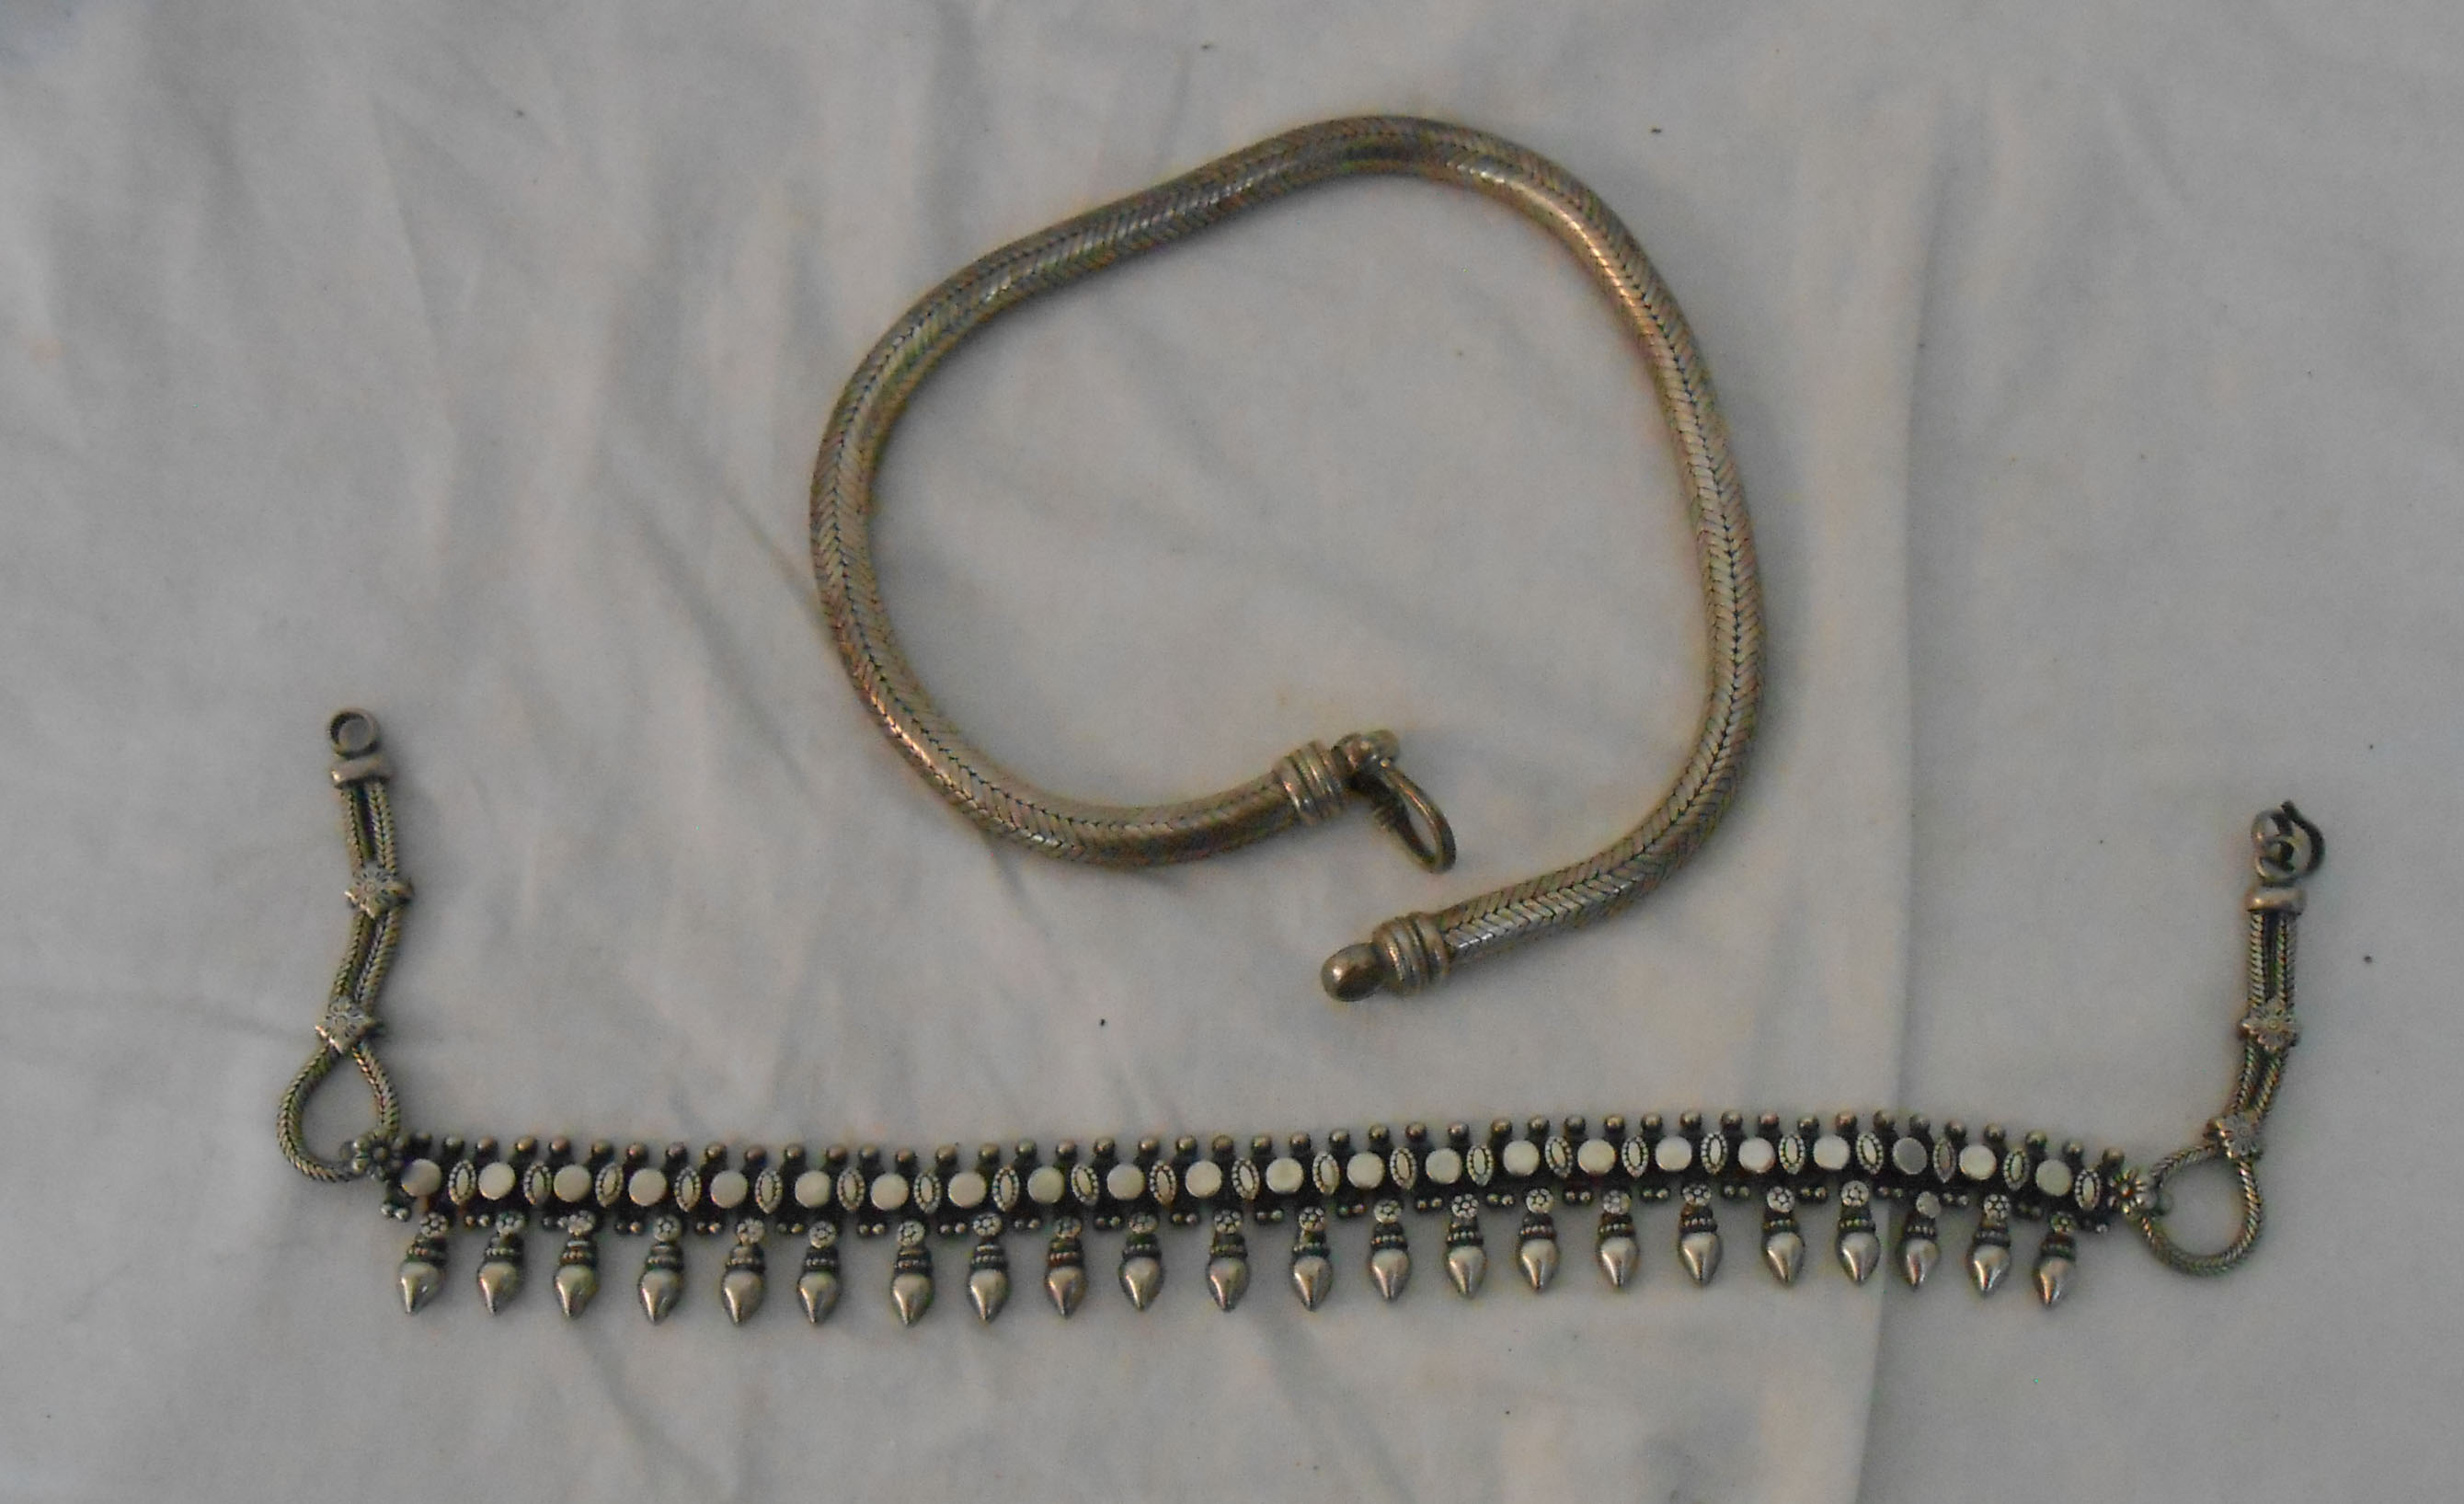 A heavy Indian white metal snake-link choker necklace - sold with an ornate beaded similar